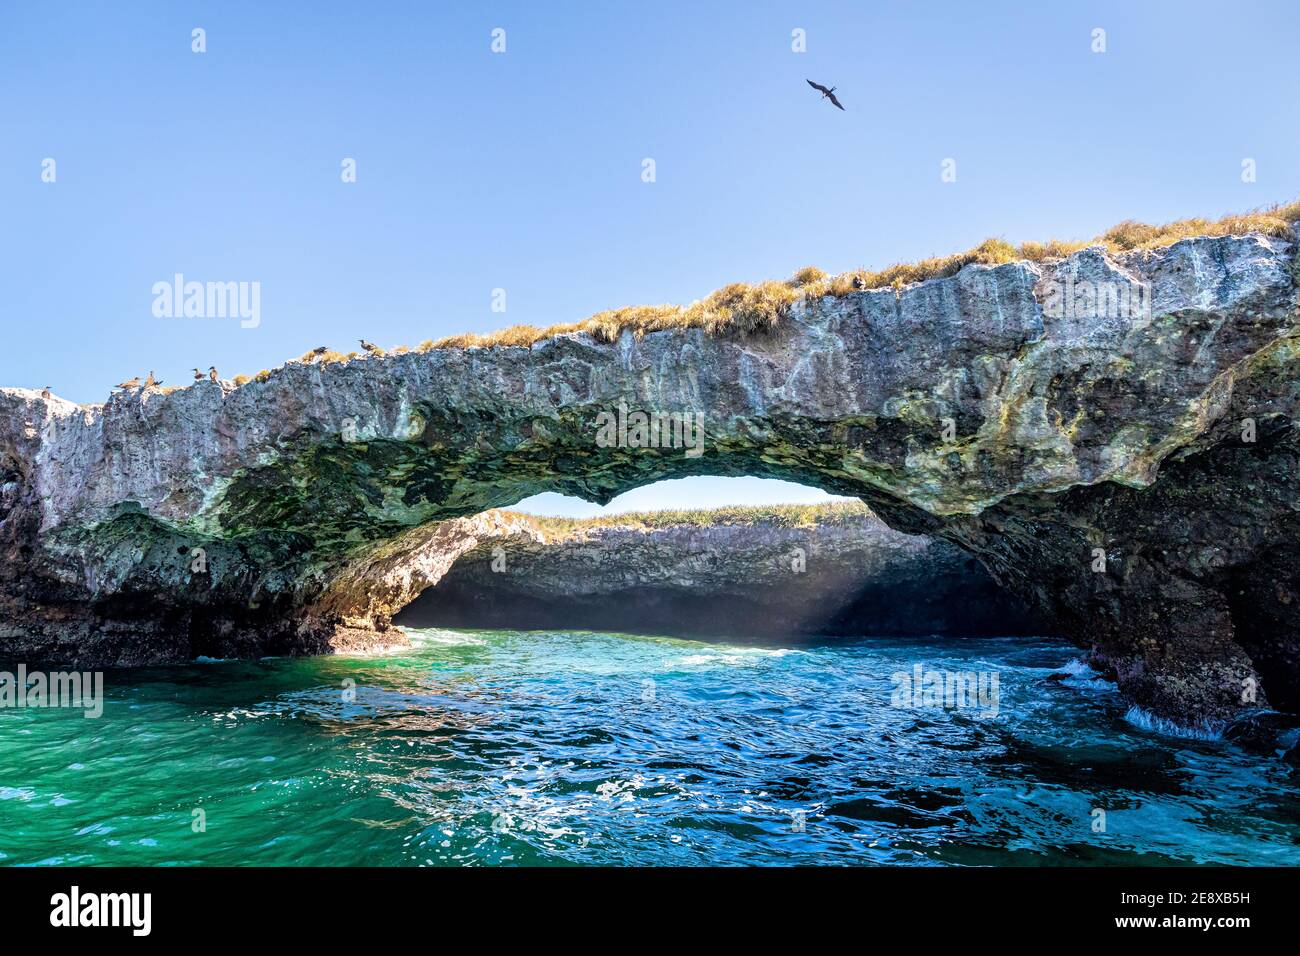 Archway to a hidden cove of the Marietas Islands off the Pacific Coast of Nayarit, Mexico. Stock Photo